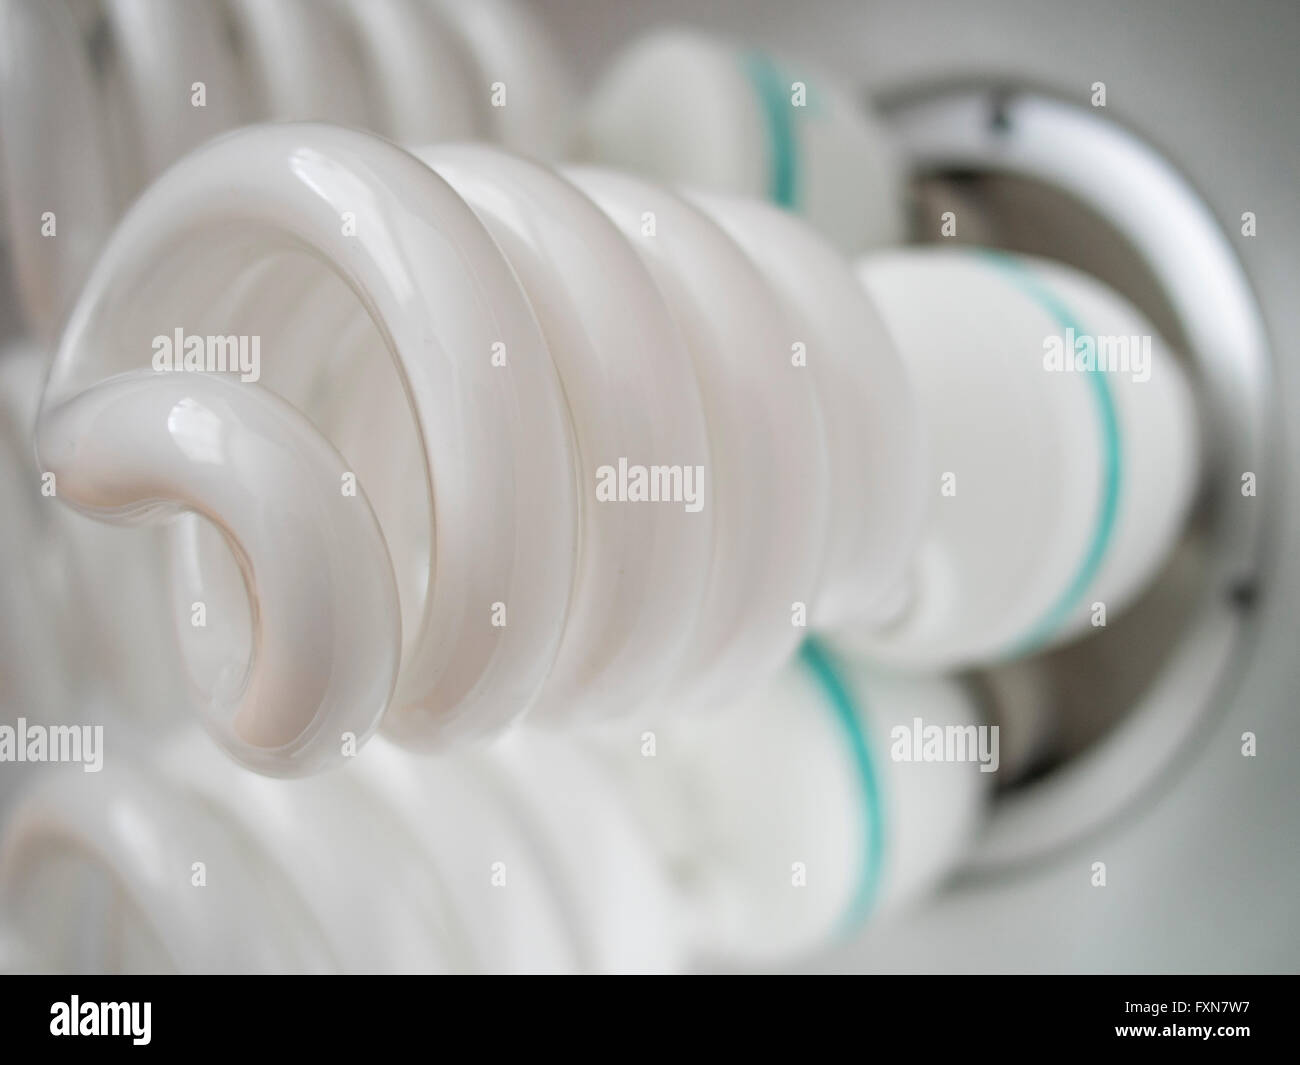 Four large eco-friendly low-energy spiral lighbulbs. Stock Photo